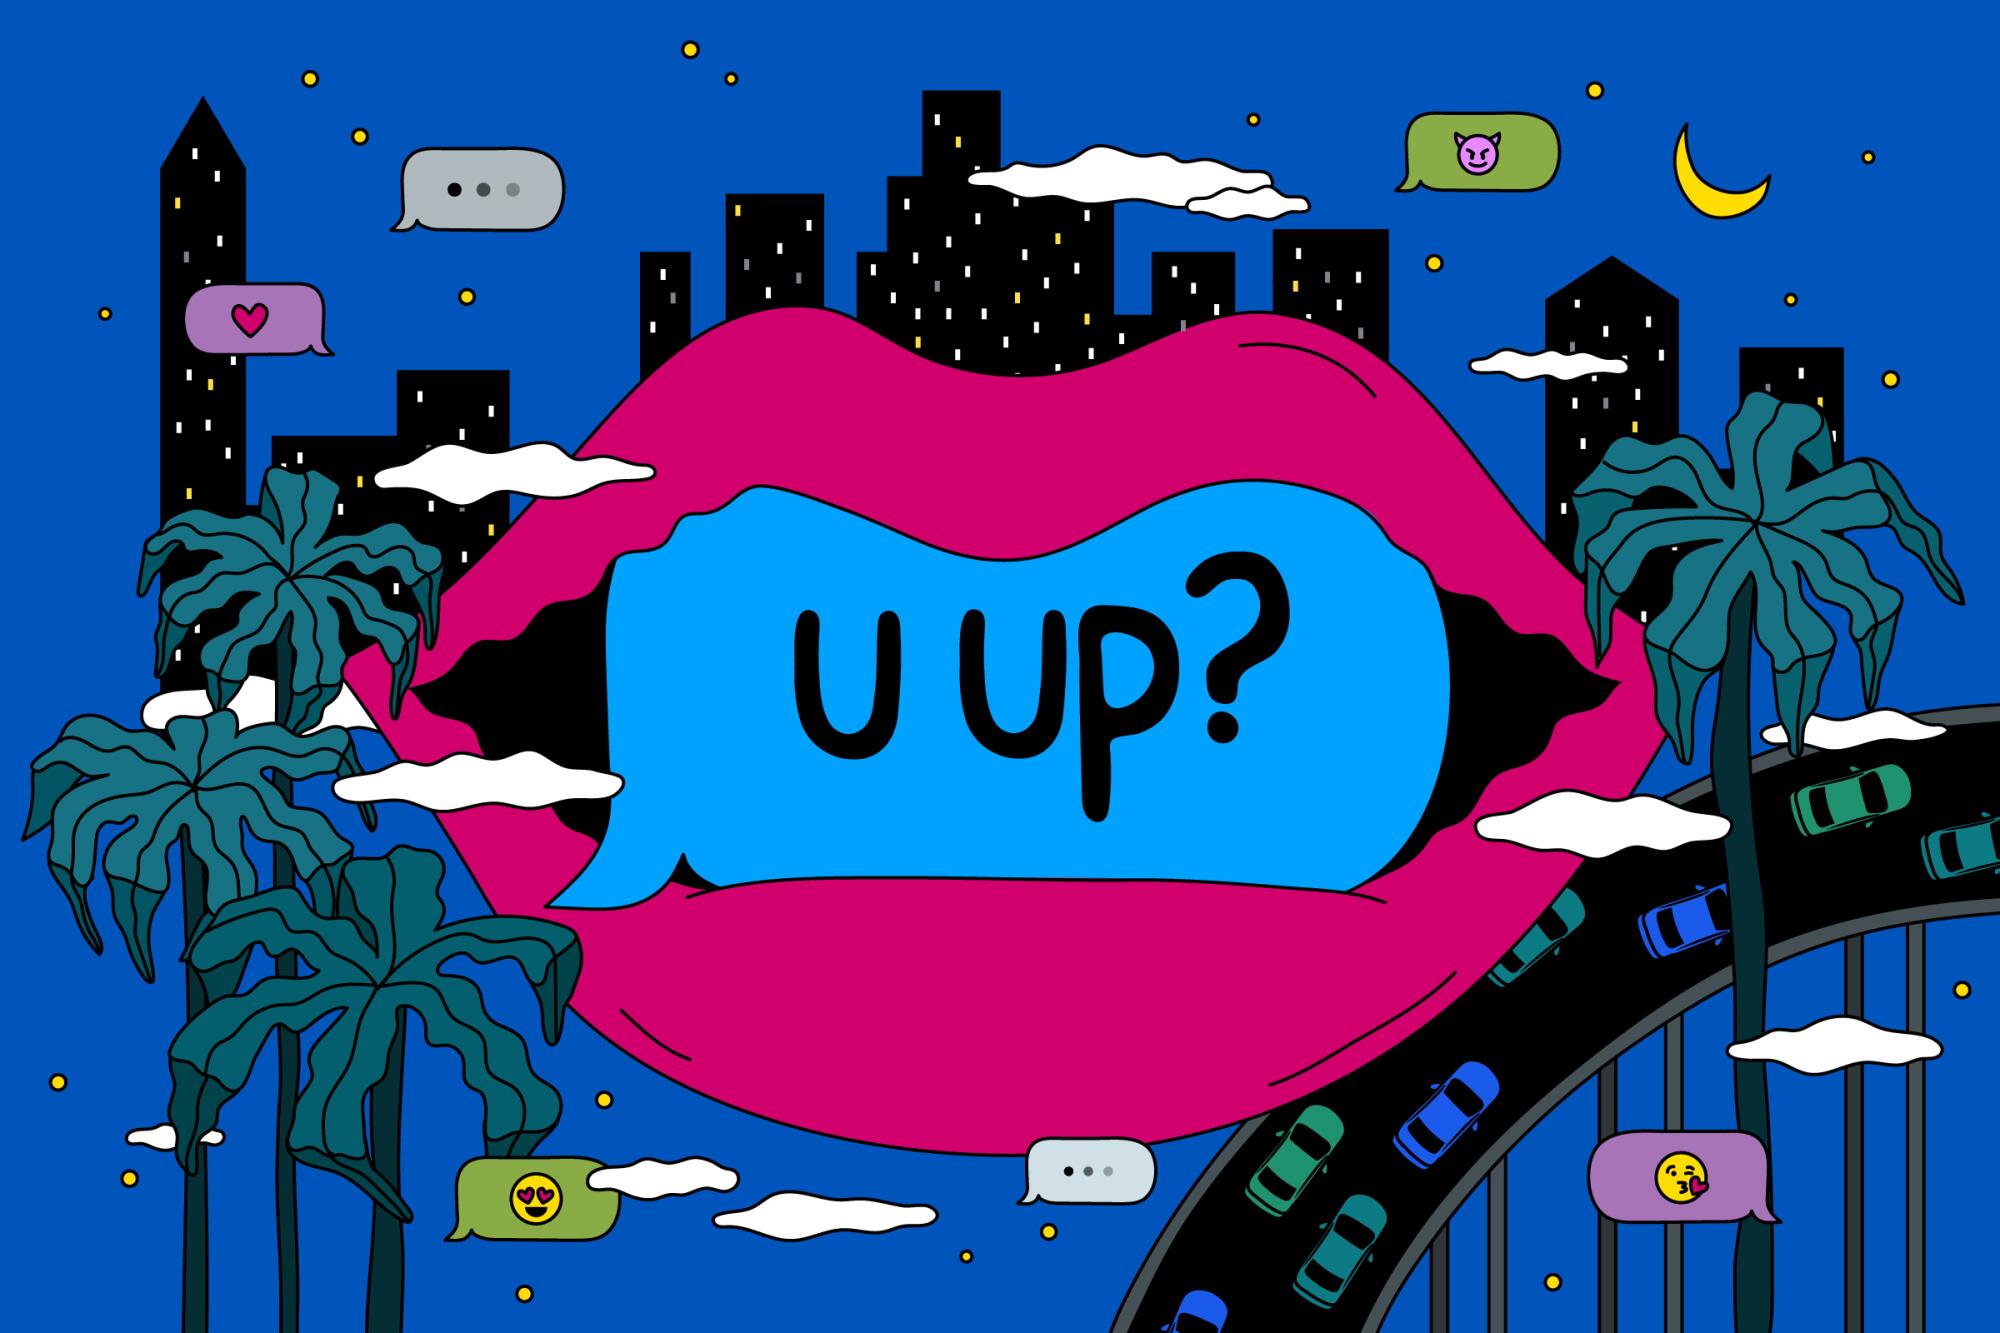 Illo of a city skyline view with text bubbles showing emojis and a large pair of lips holding a text bubble saying "u up?"